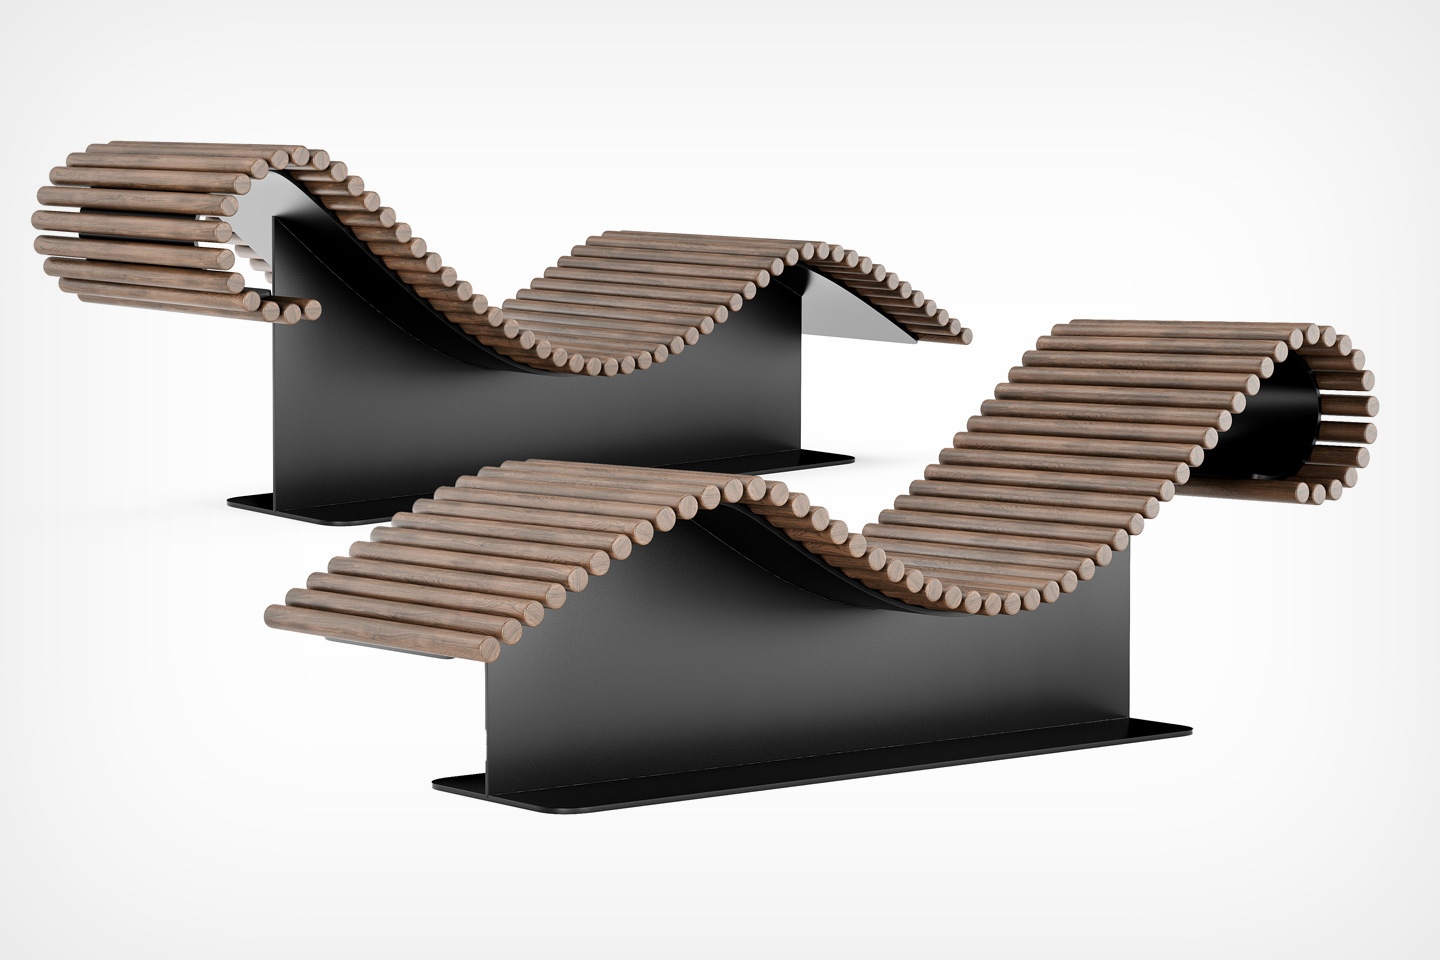 #This chaise lounge’s resting surface was inspired by the shape of a spine